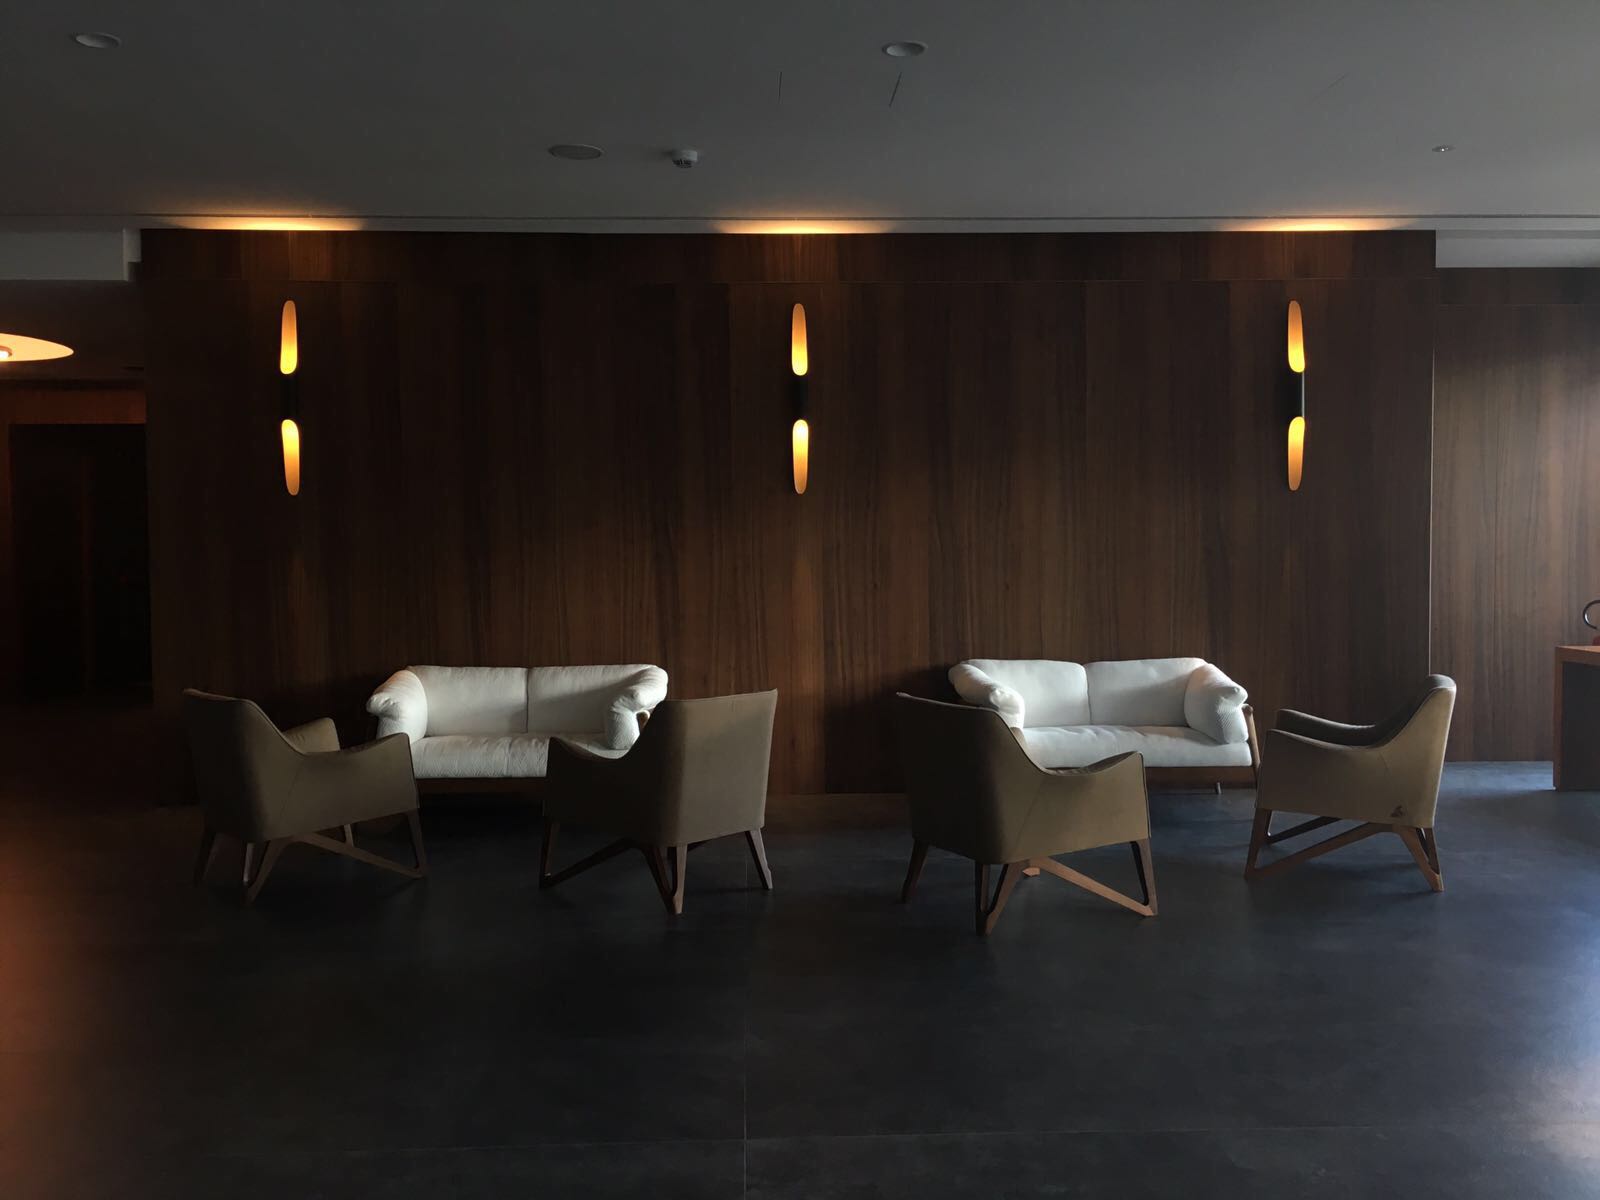 A Five-Star Hotel in Lake Garda with Bespoke Contemporary Lamps